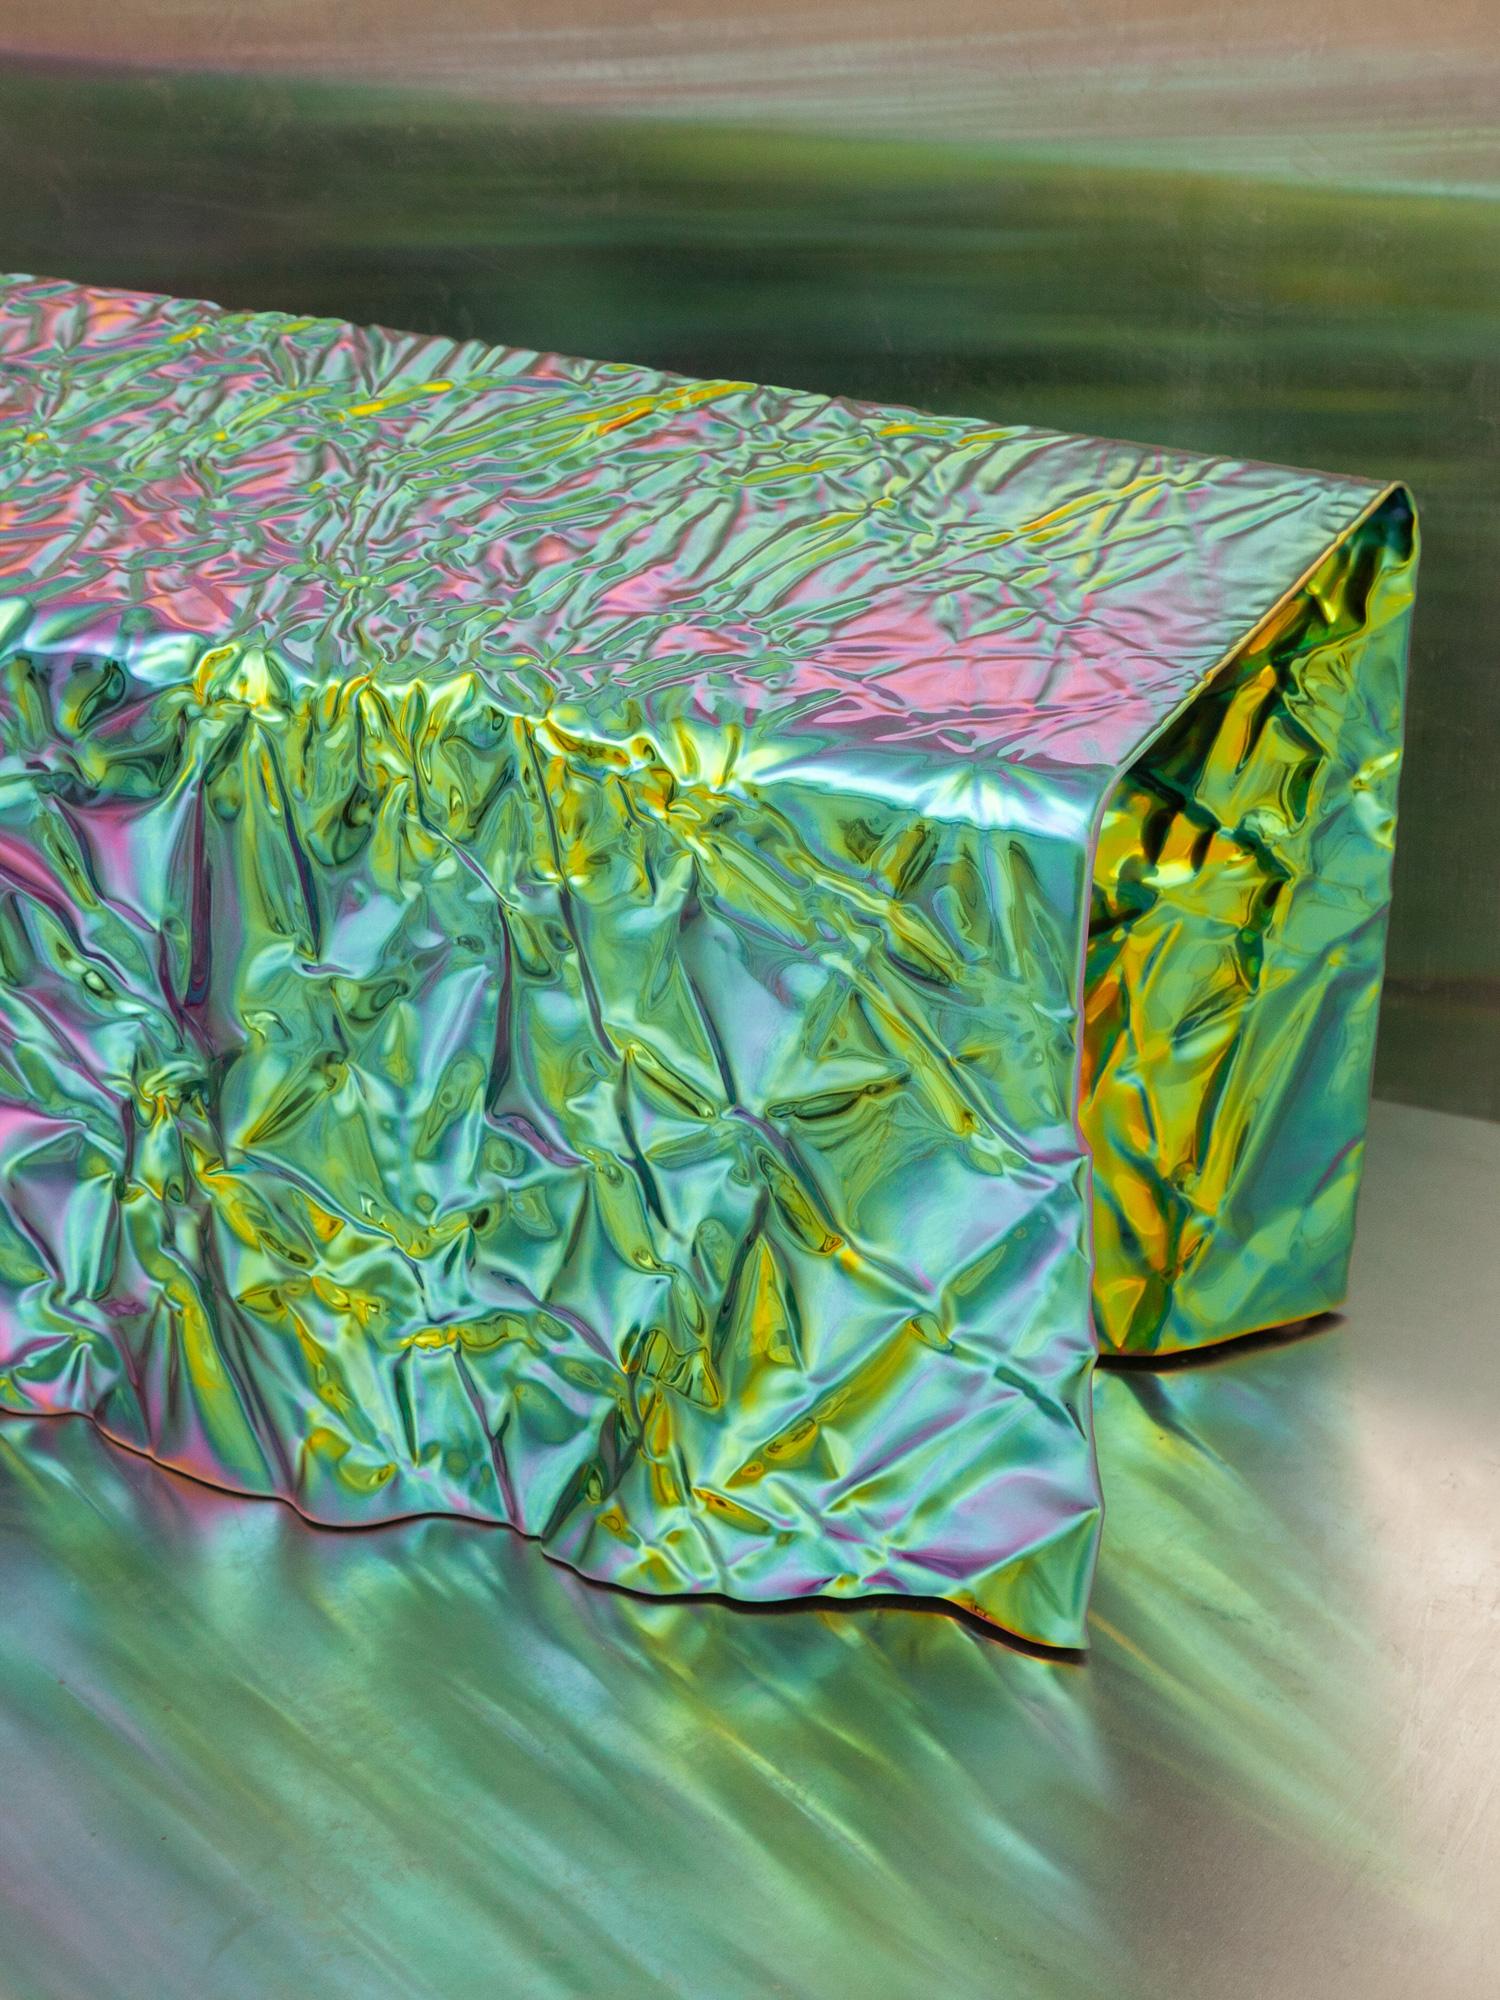 Steel Christopher Prinz “Wrinkled Coffee Table” in Polished Rainbow Iridescent For Sale